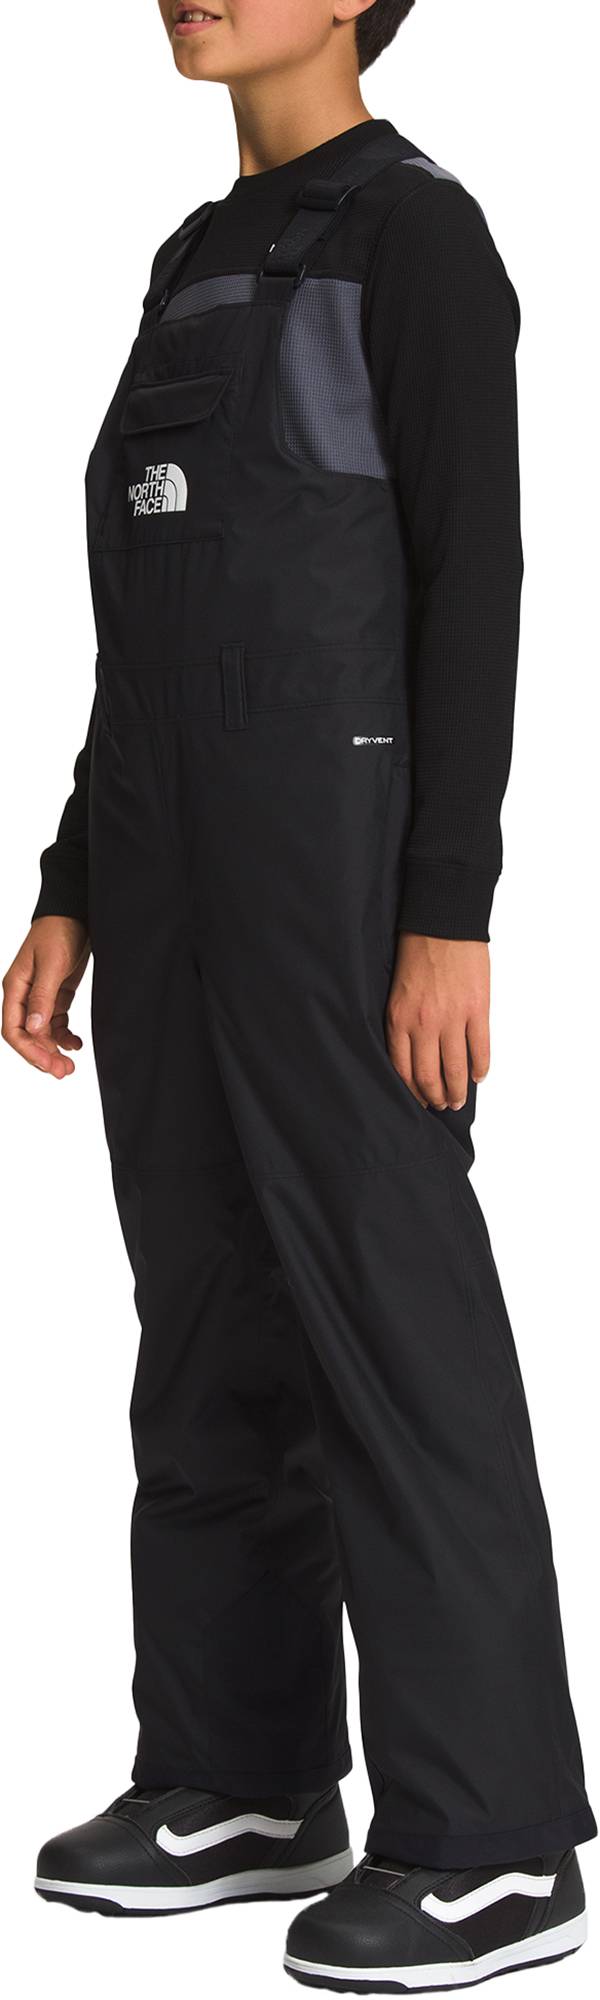 The North Face Boys' Insulated Bib product image